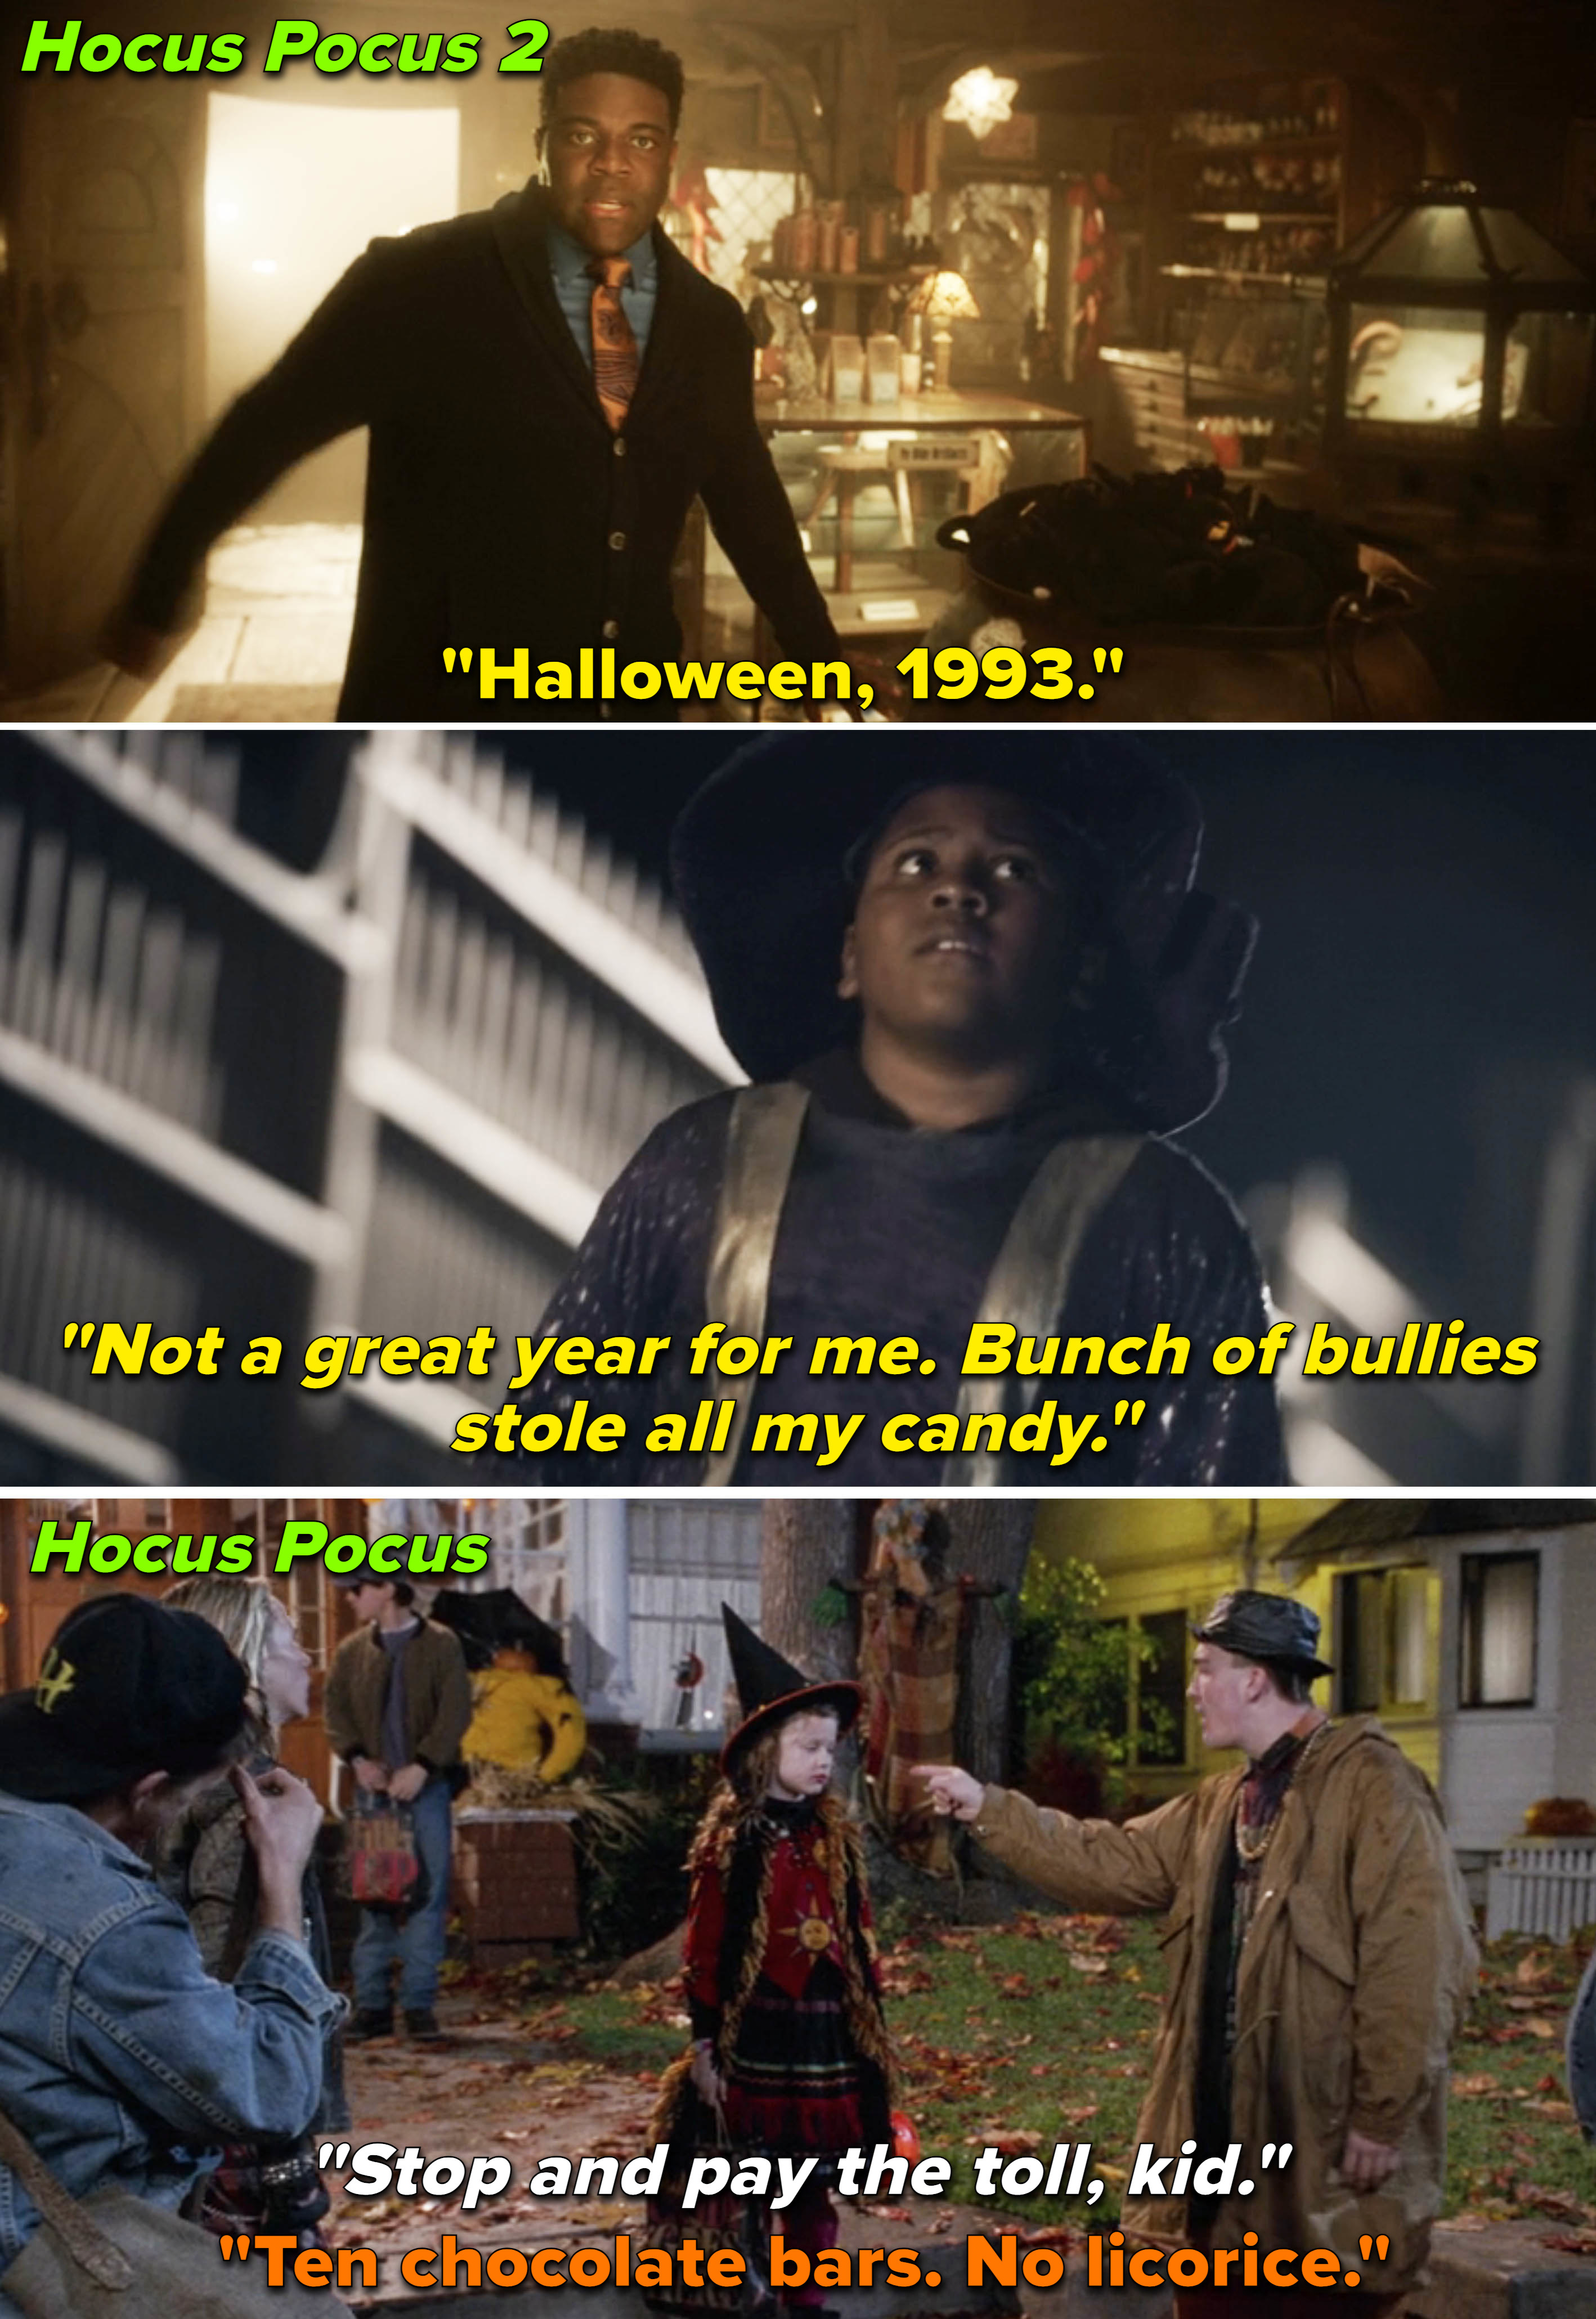 In the original, a child trick-or-treating is told, &quot;Stop and pay the toll, kid&quot;